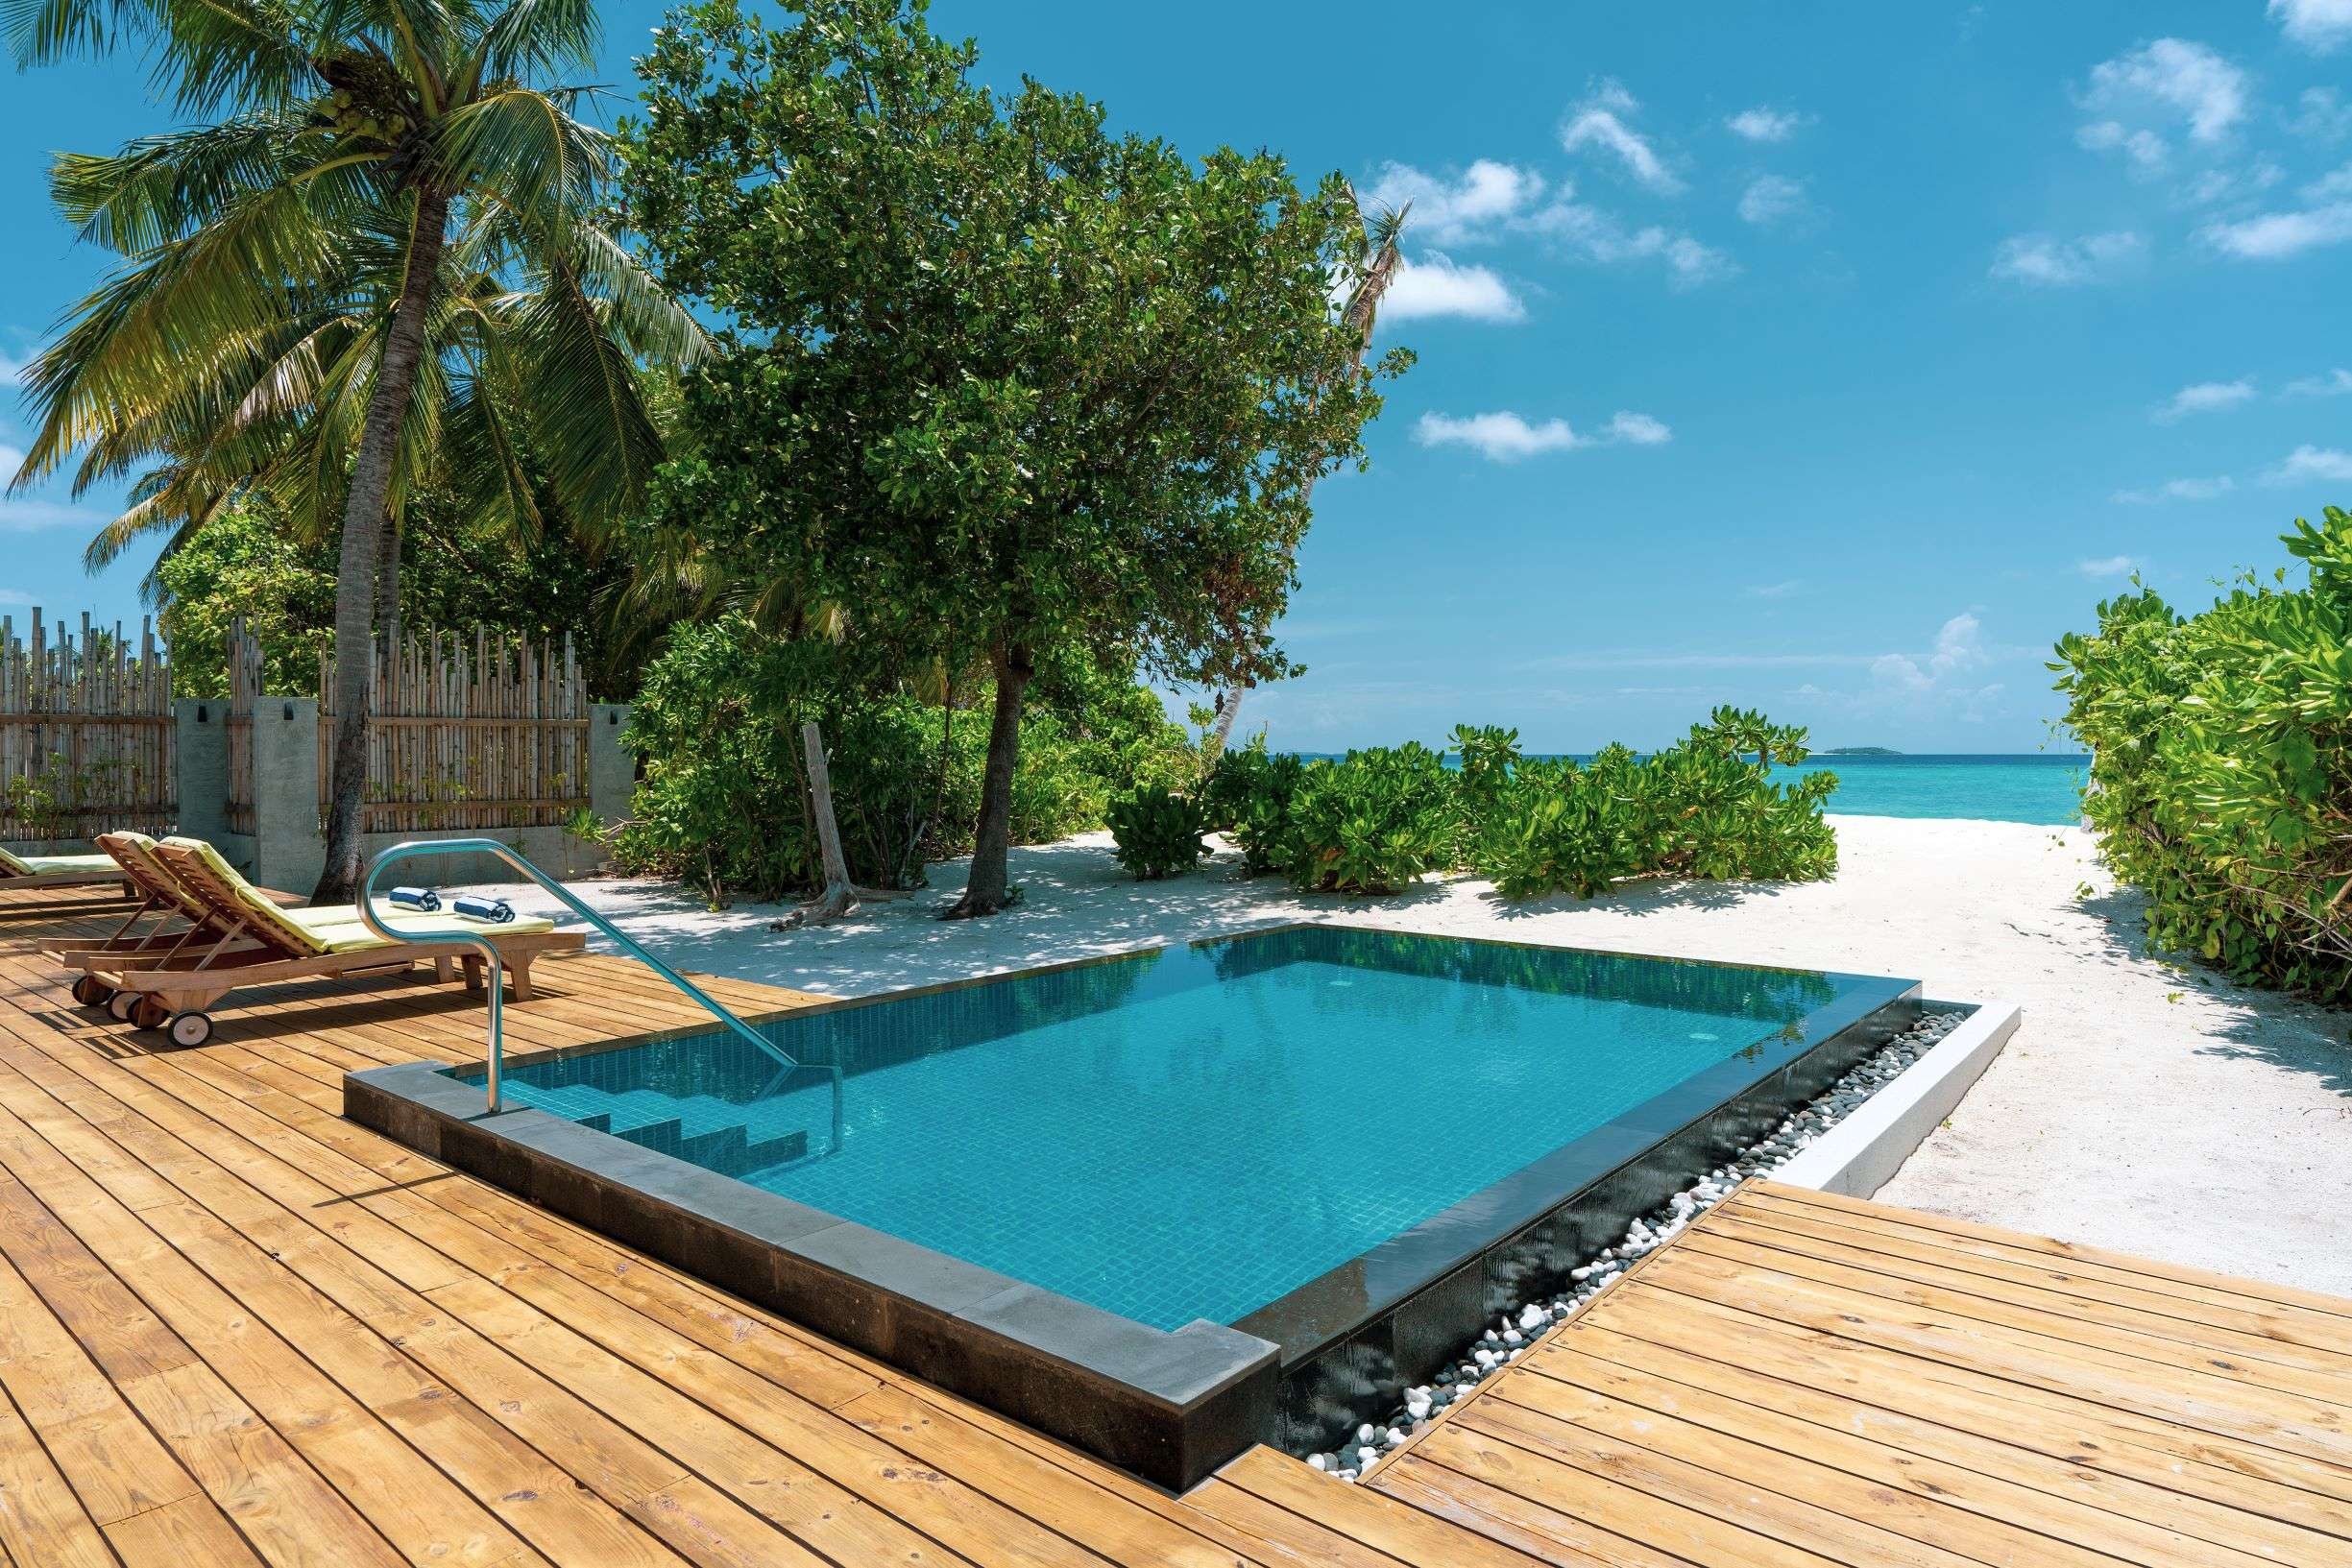 Two-Bedrooms Beach Residence with Pool, Furaveri Maldives 5*